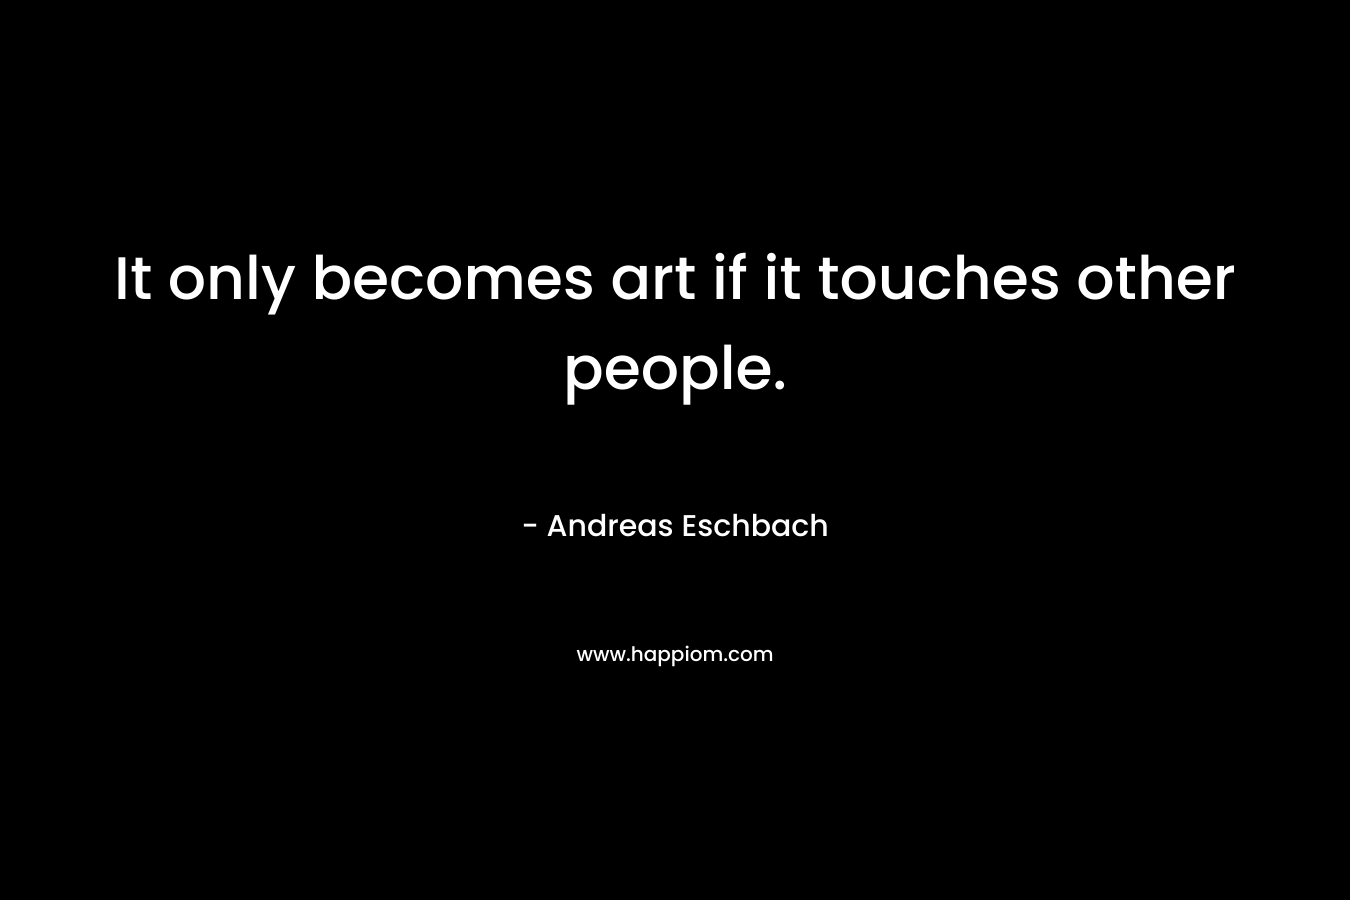 It only becomes art if it touches other people.